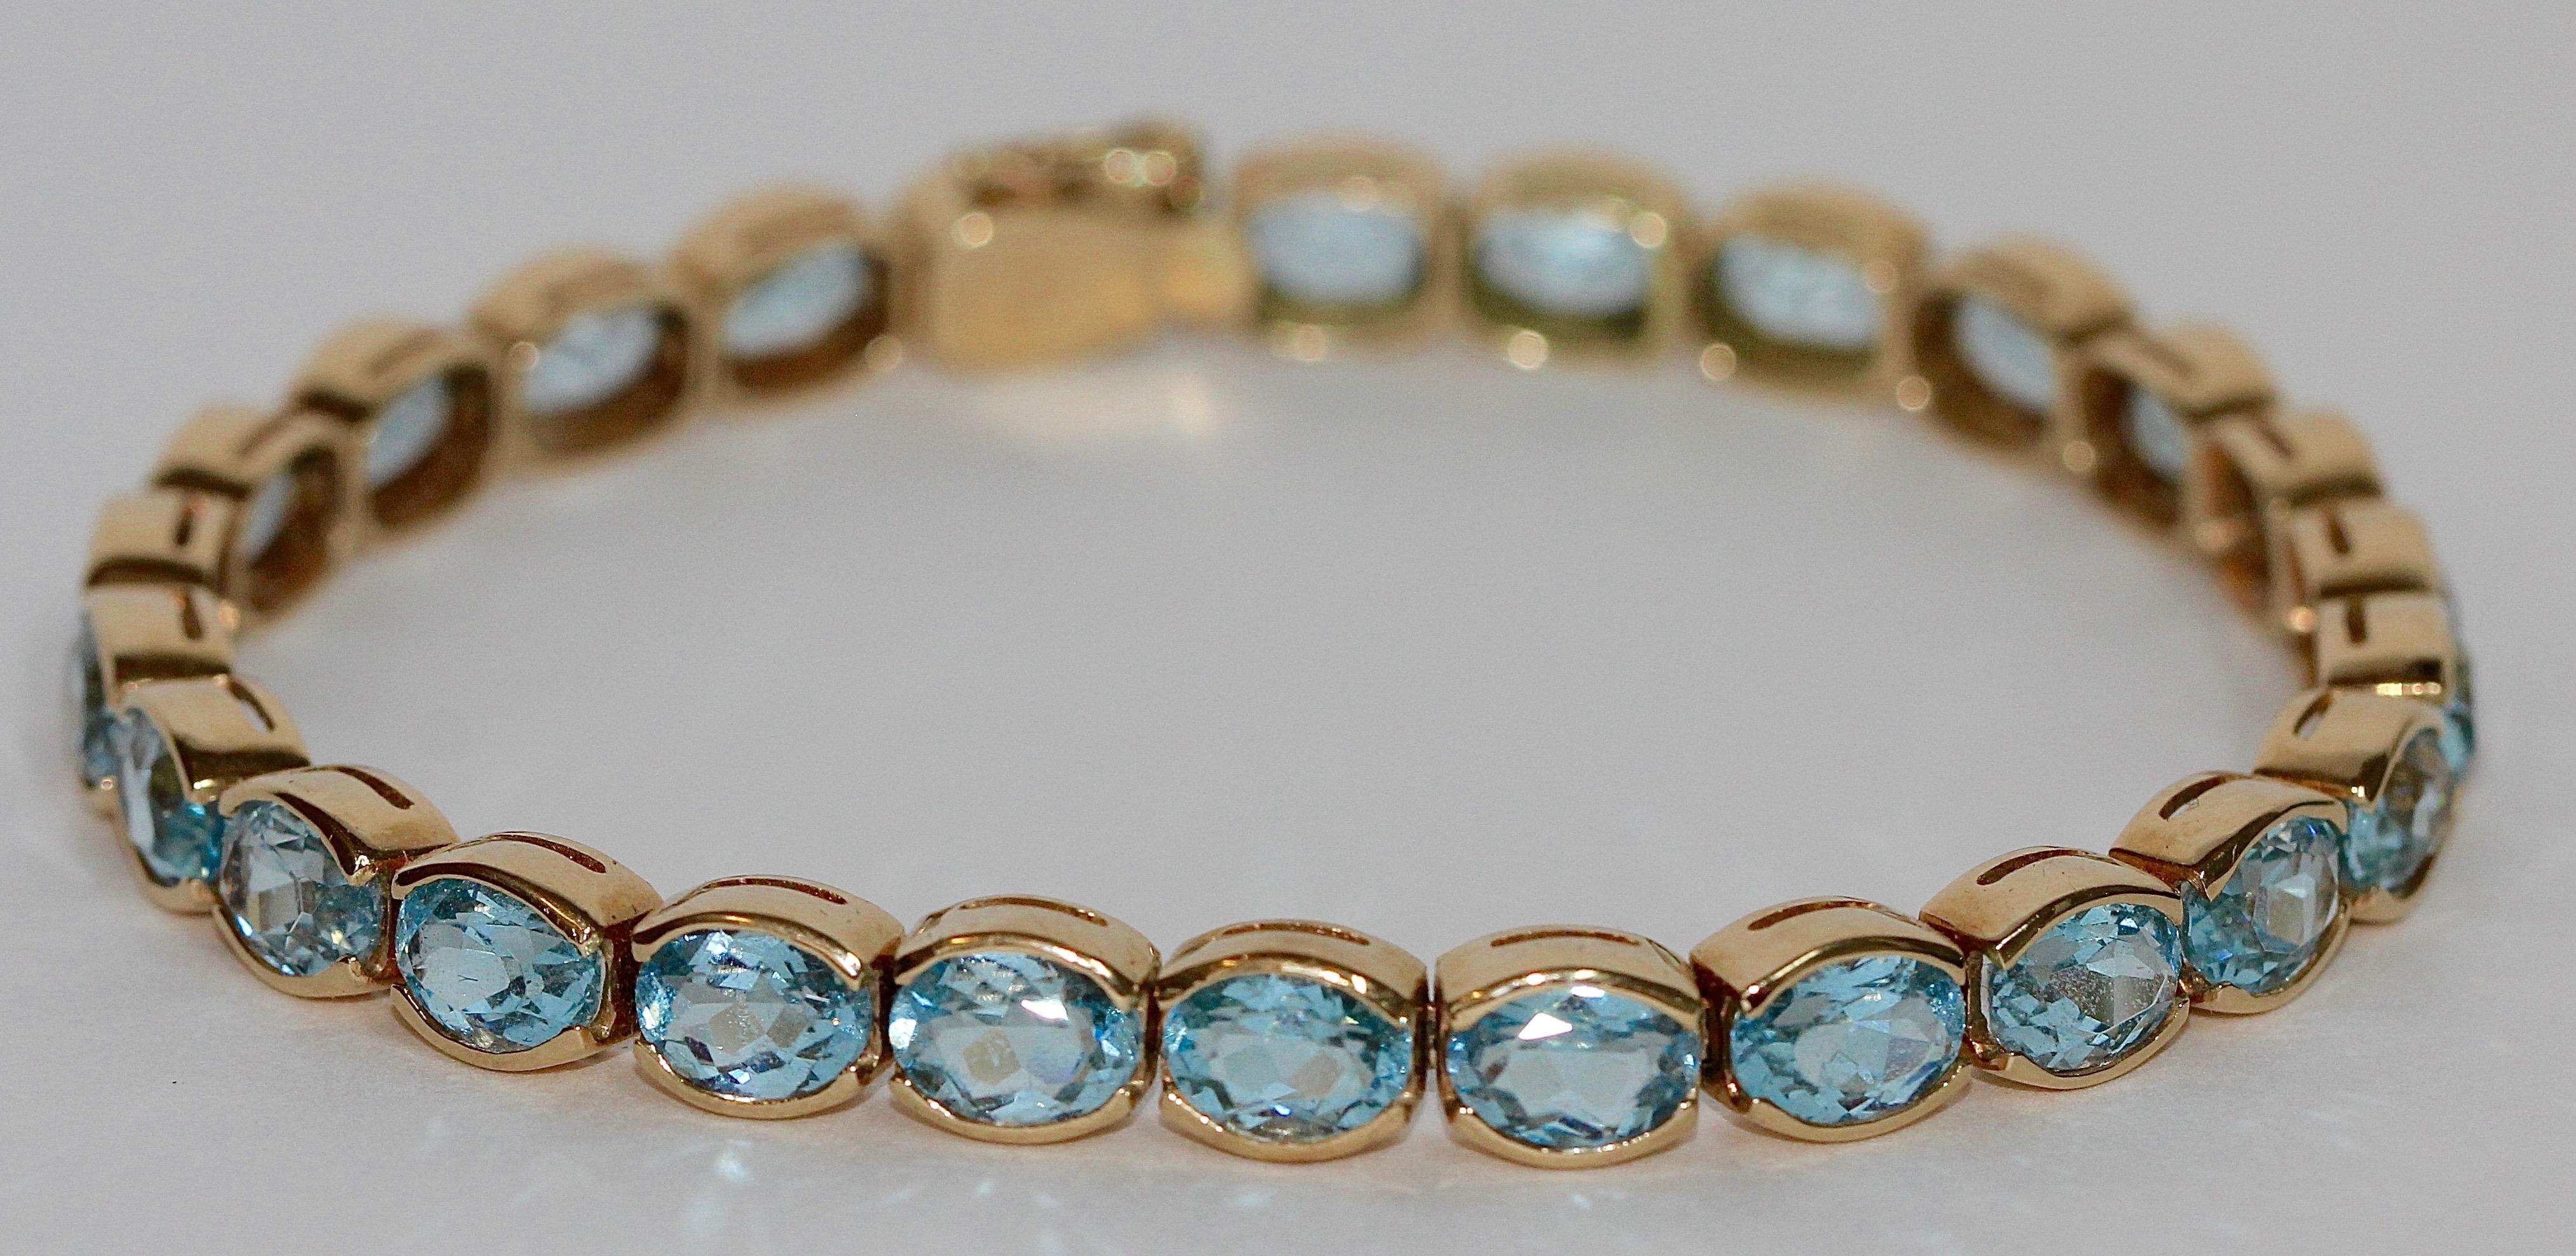 Beautiful aquamarine tennis bracelet. 14k yellow gold.
Set with a total of 26 oval, faceted aquamarines.